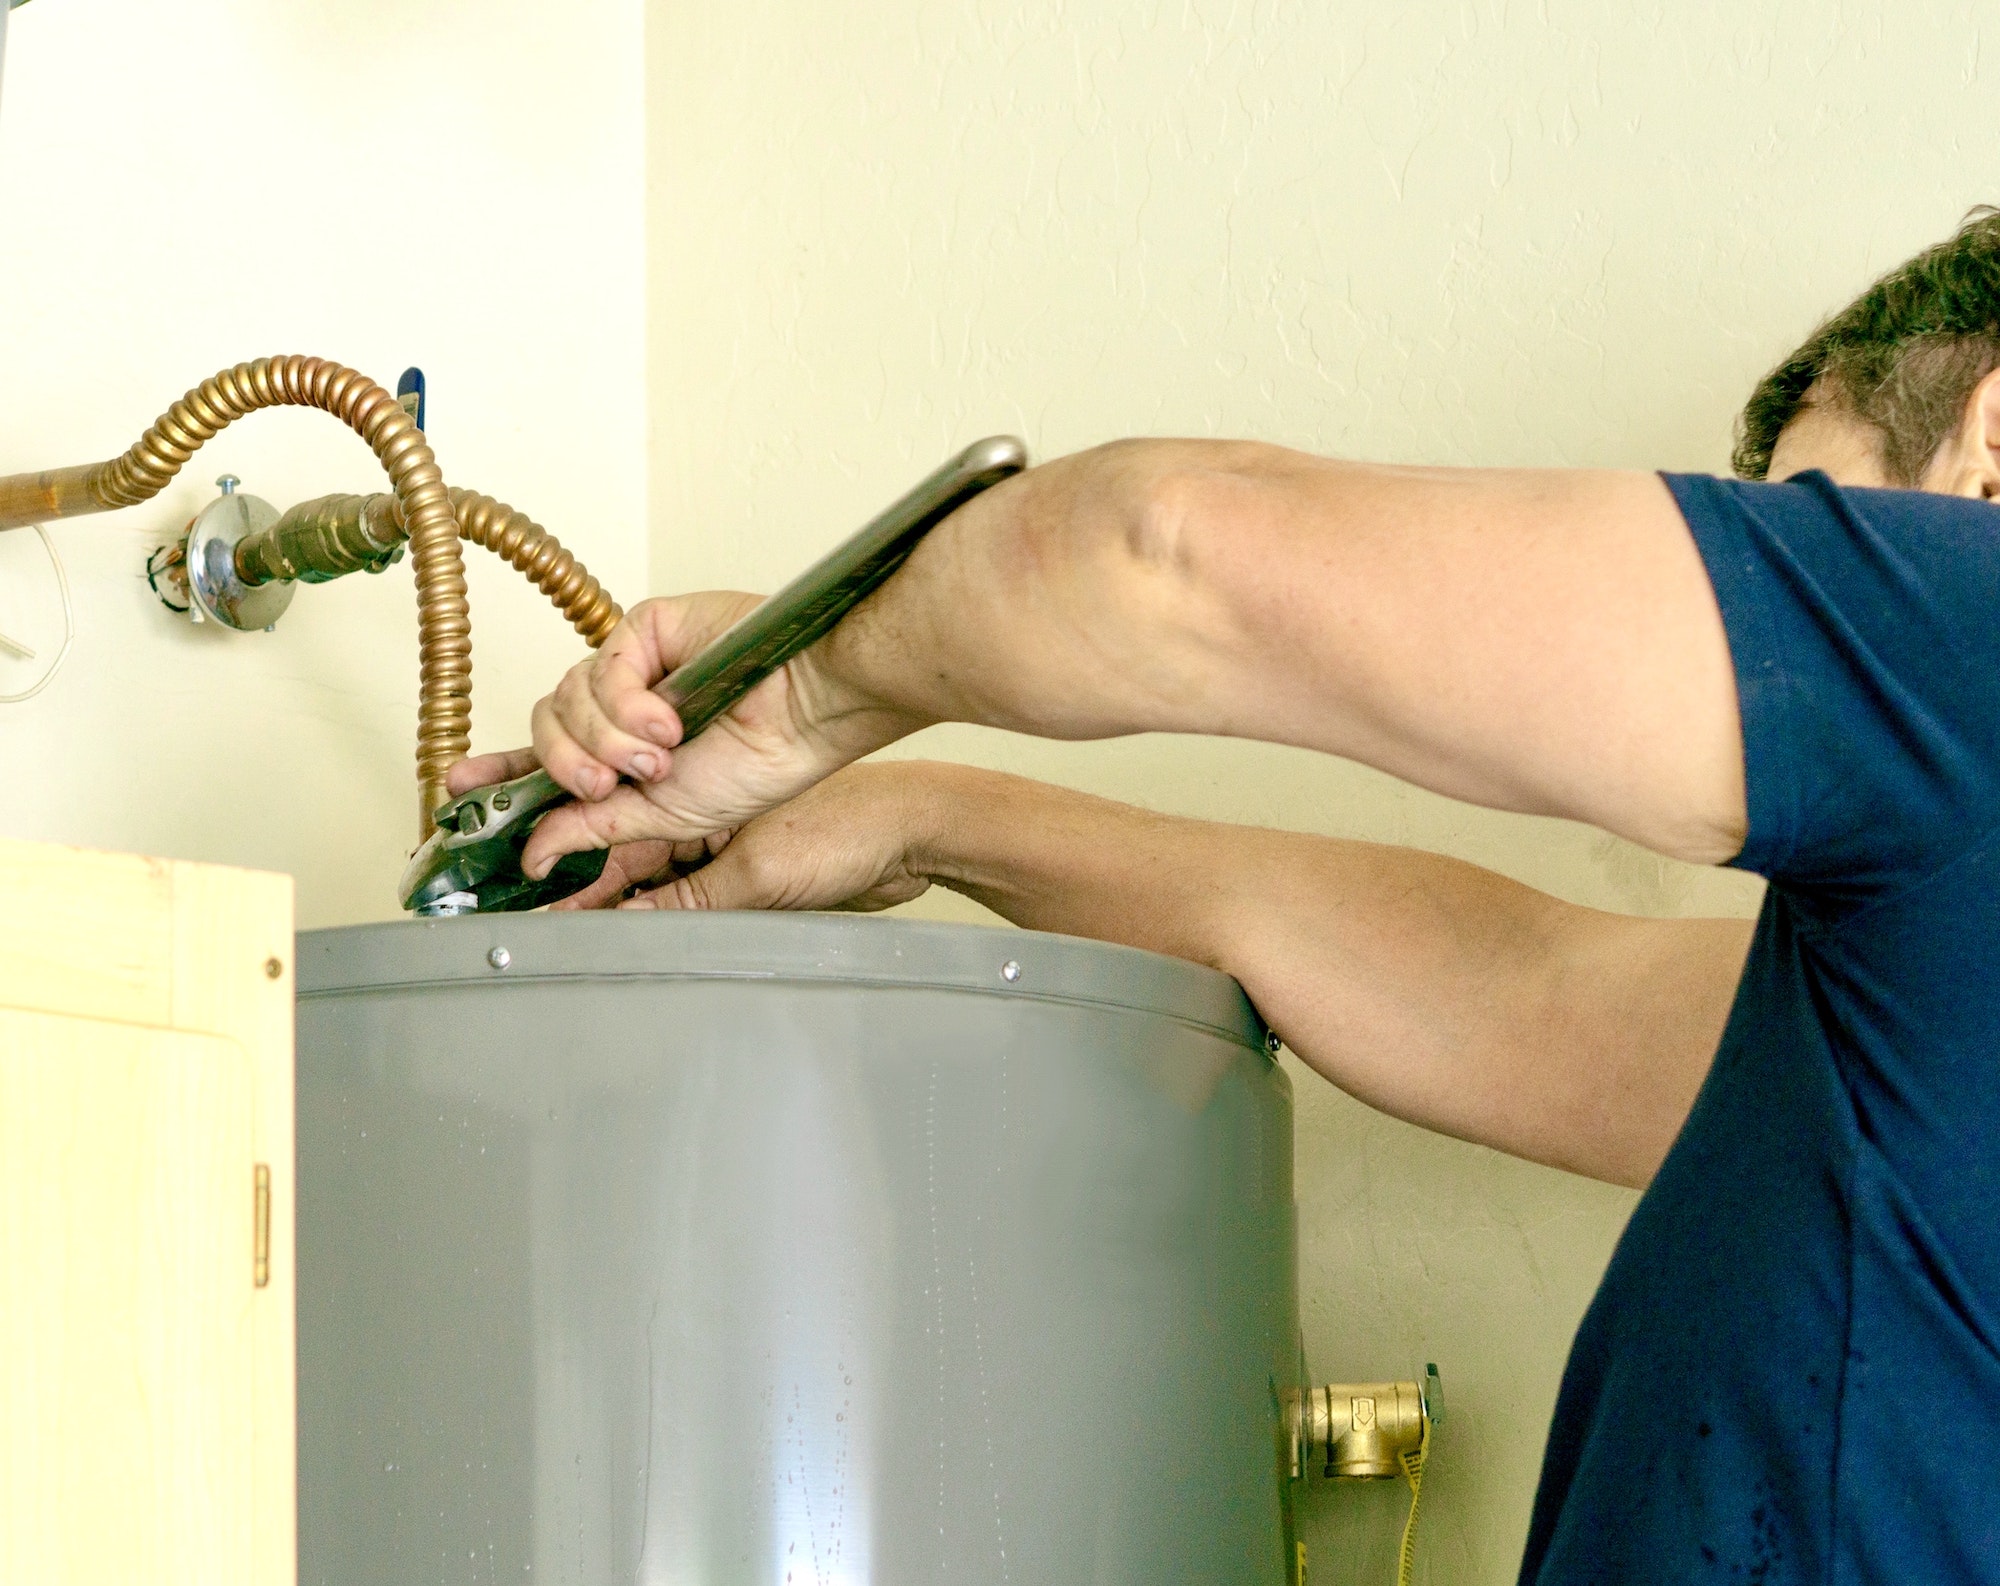 Adult male using a wrench to make adjustments on top of a hot water heater